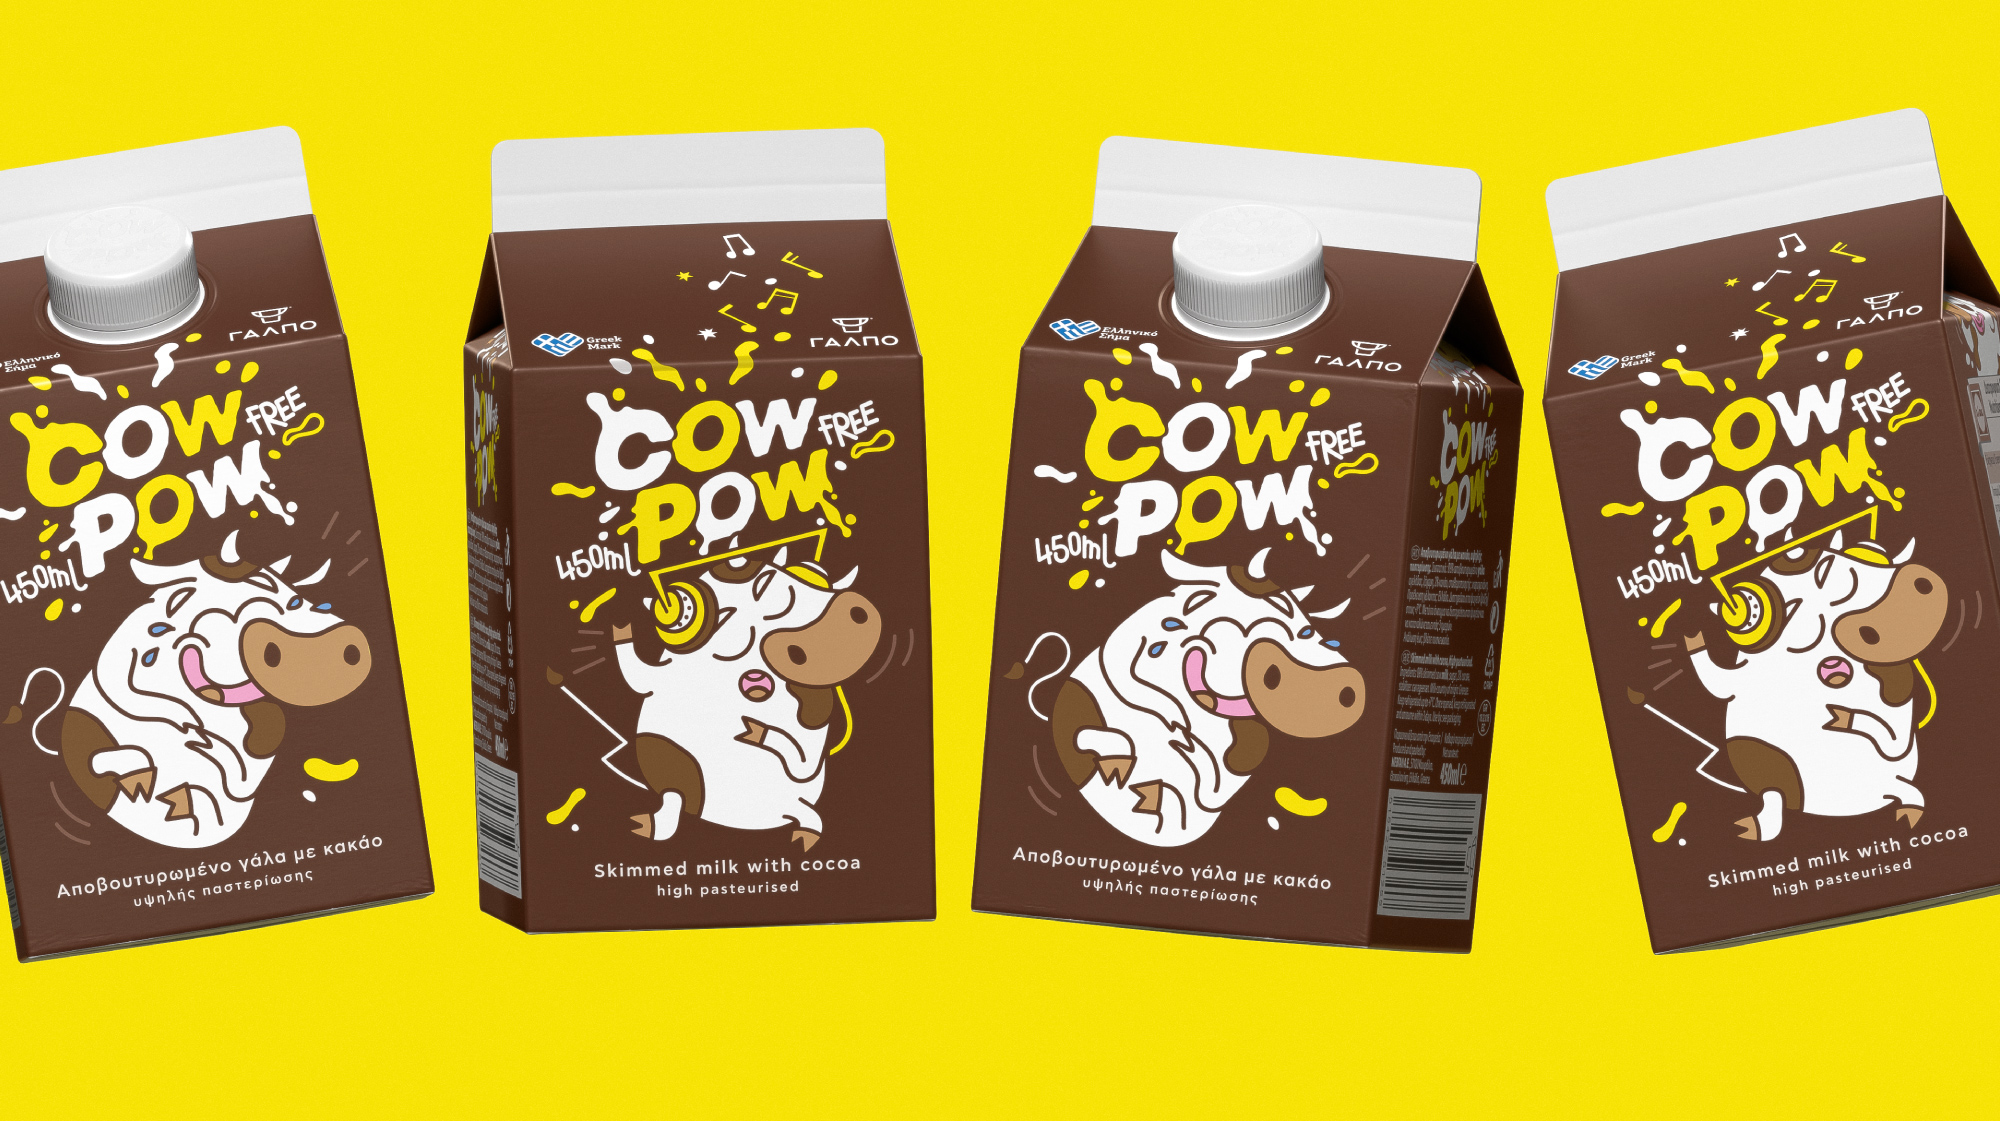 Lidl Launches Cow-pow: a Punchy Choco-Milk Product With a Bold and Witty Mascot!